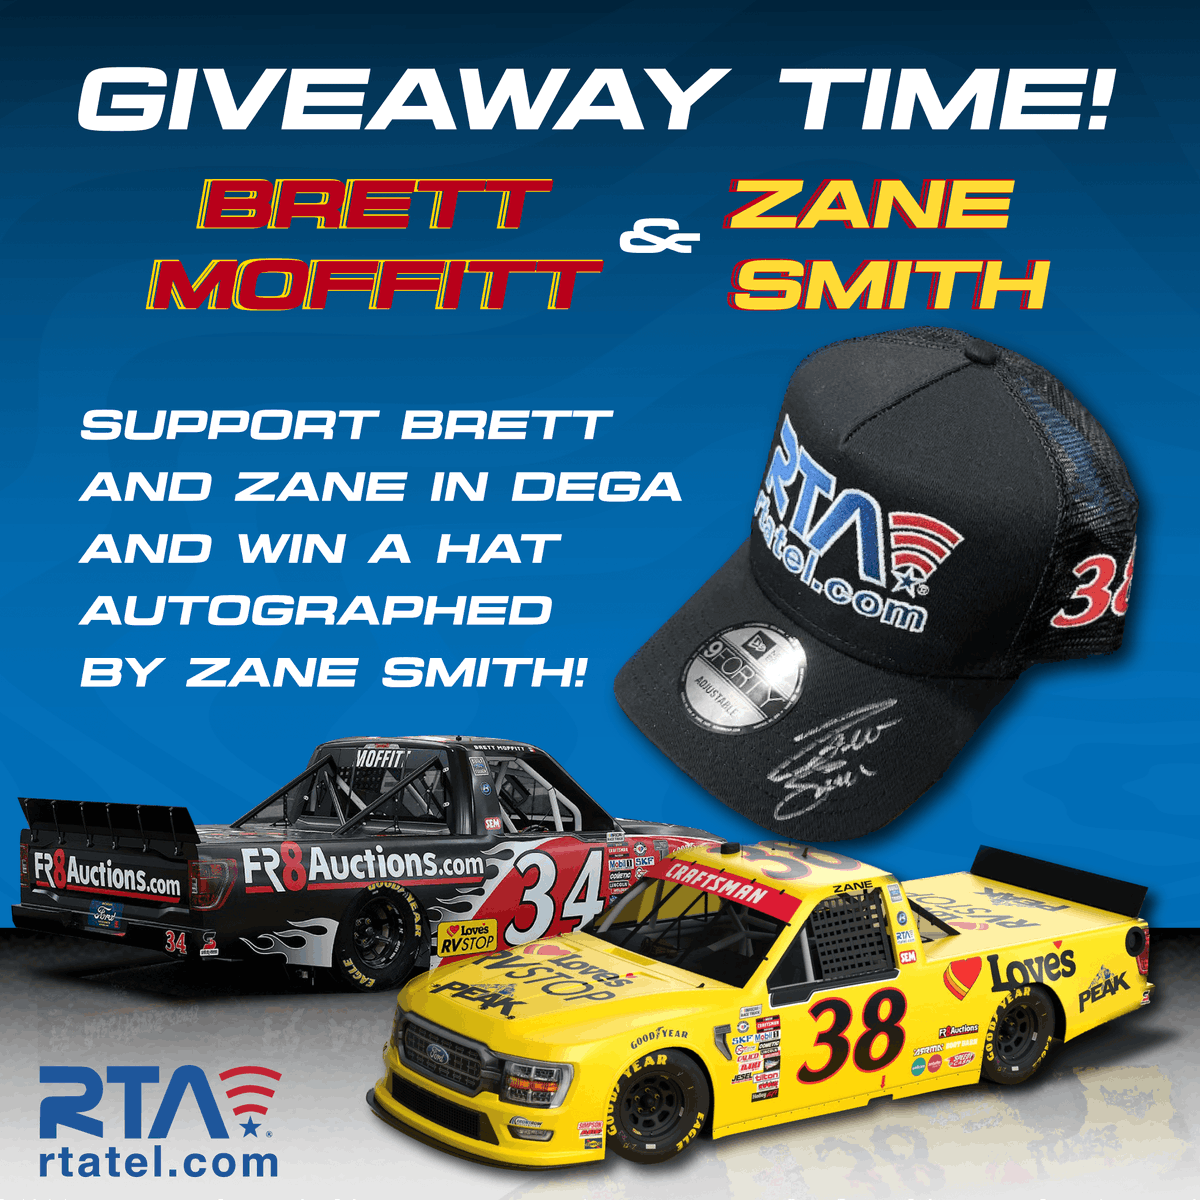 Support Zane and Brett in Talladega! 🏁 Share this post 🔄, comment 💬, and follow RTA ➕ for a chance to win an RTA hat autographed by Zane Smith. Don't miss out on the chance to win! 🎉 Watch the race on FS1 Channel 83 with gigFAST®TV Tomorrow, Sep 30 |12 p.m. CT | 1 p.m. ET!